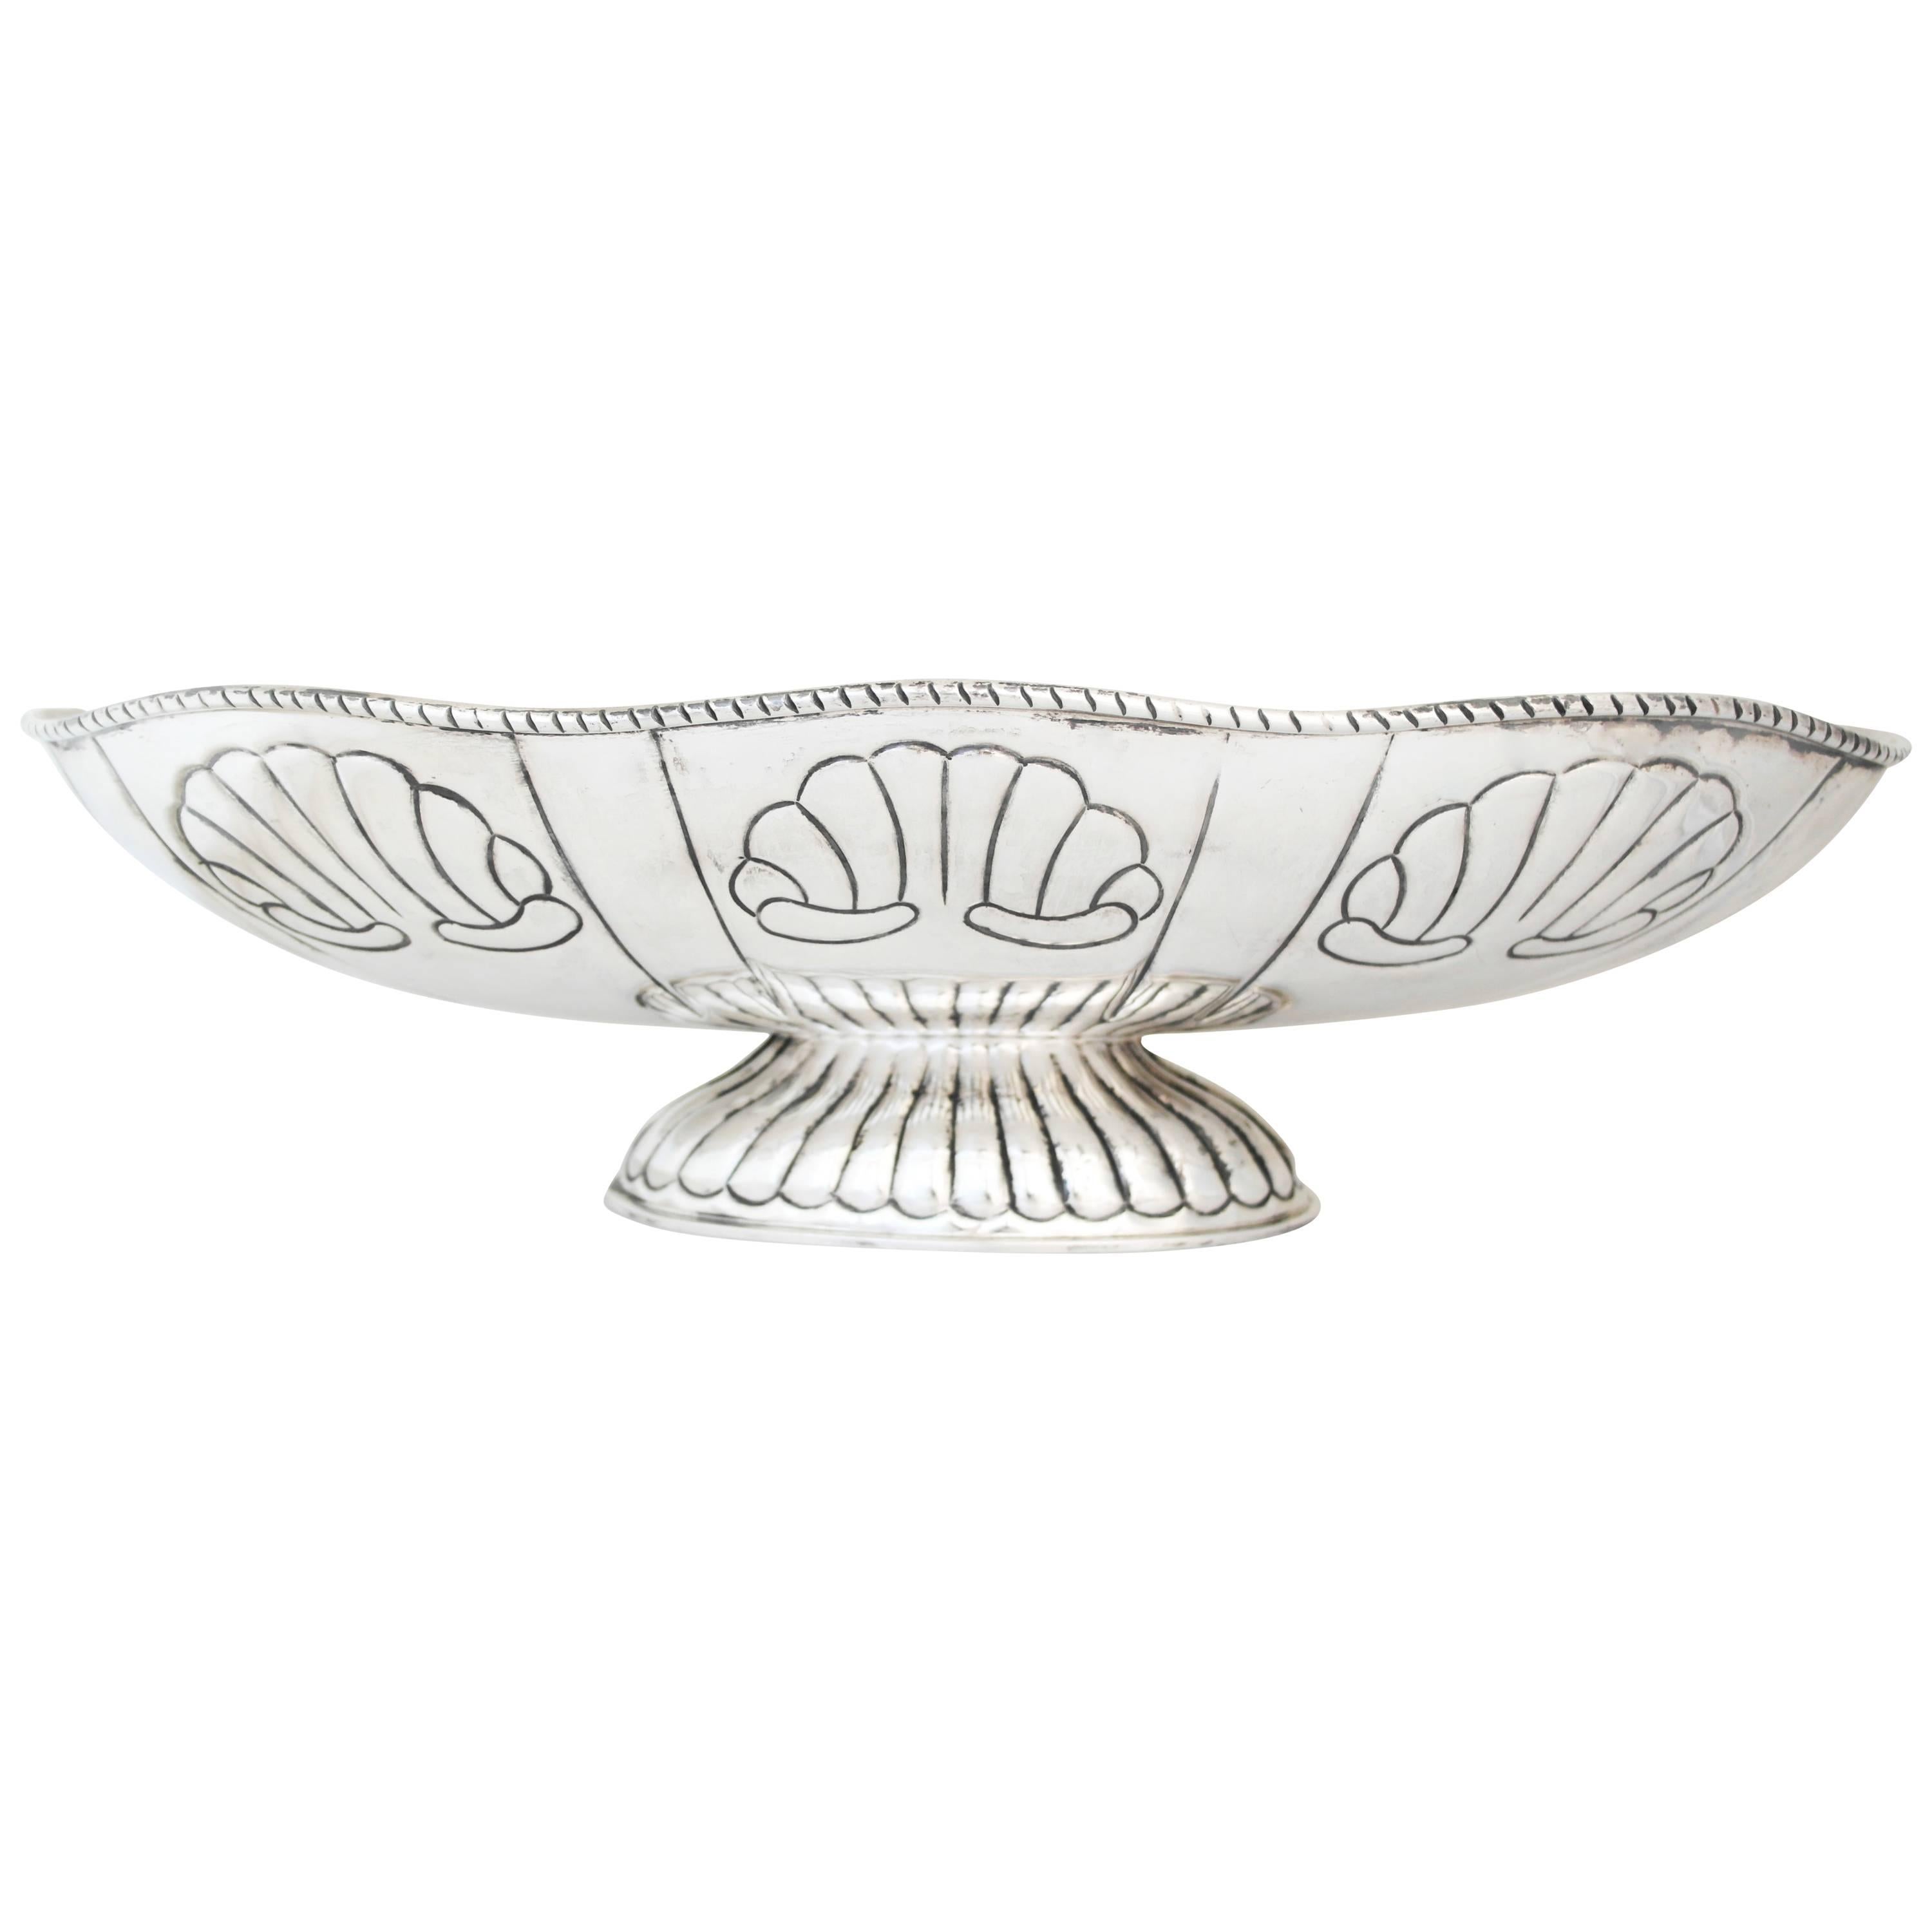 Large Tane (Tiffany of Mexico) Sterling Silver Centerpiece Bowl For Sale